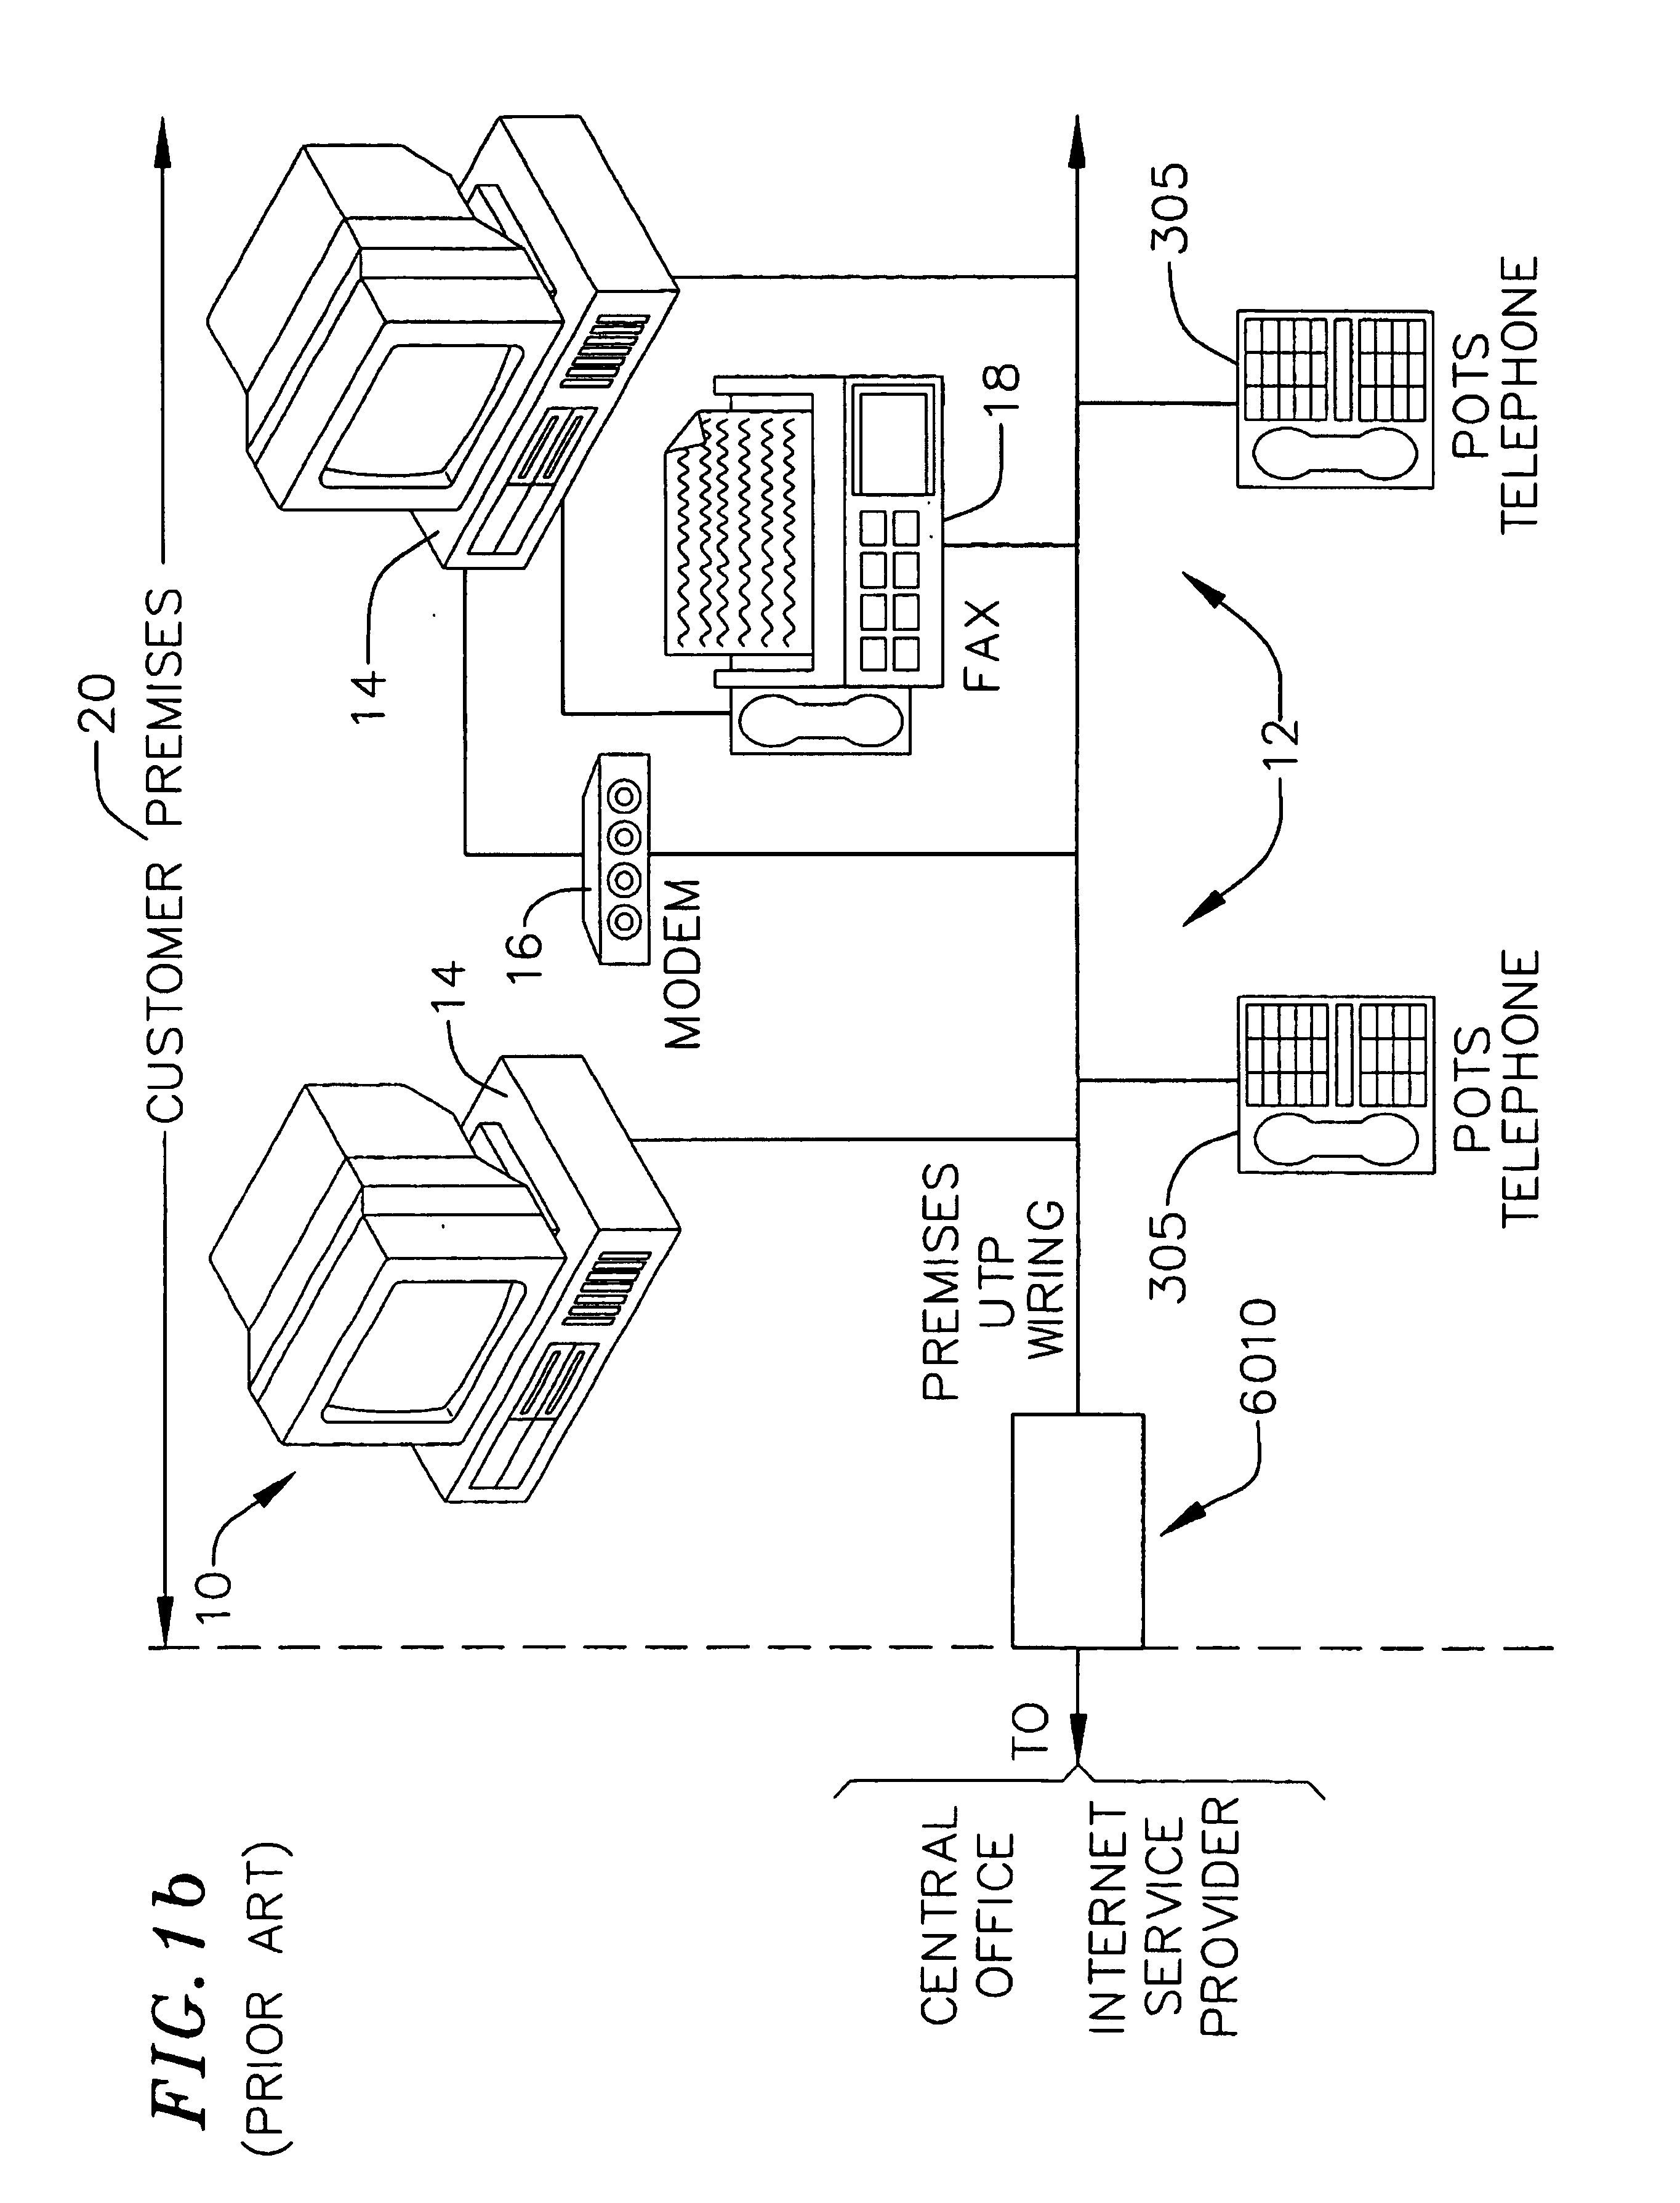 Method of controlling data sampling clocking of asynchronous network nodes in a frame-based communications network